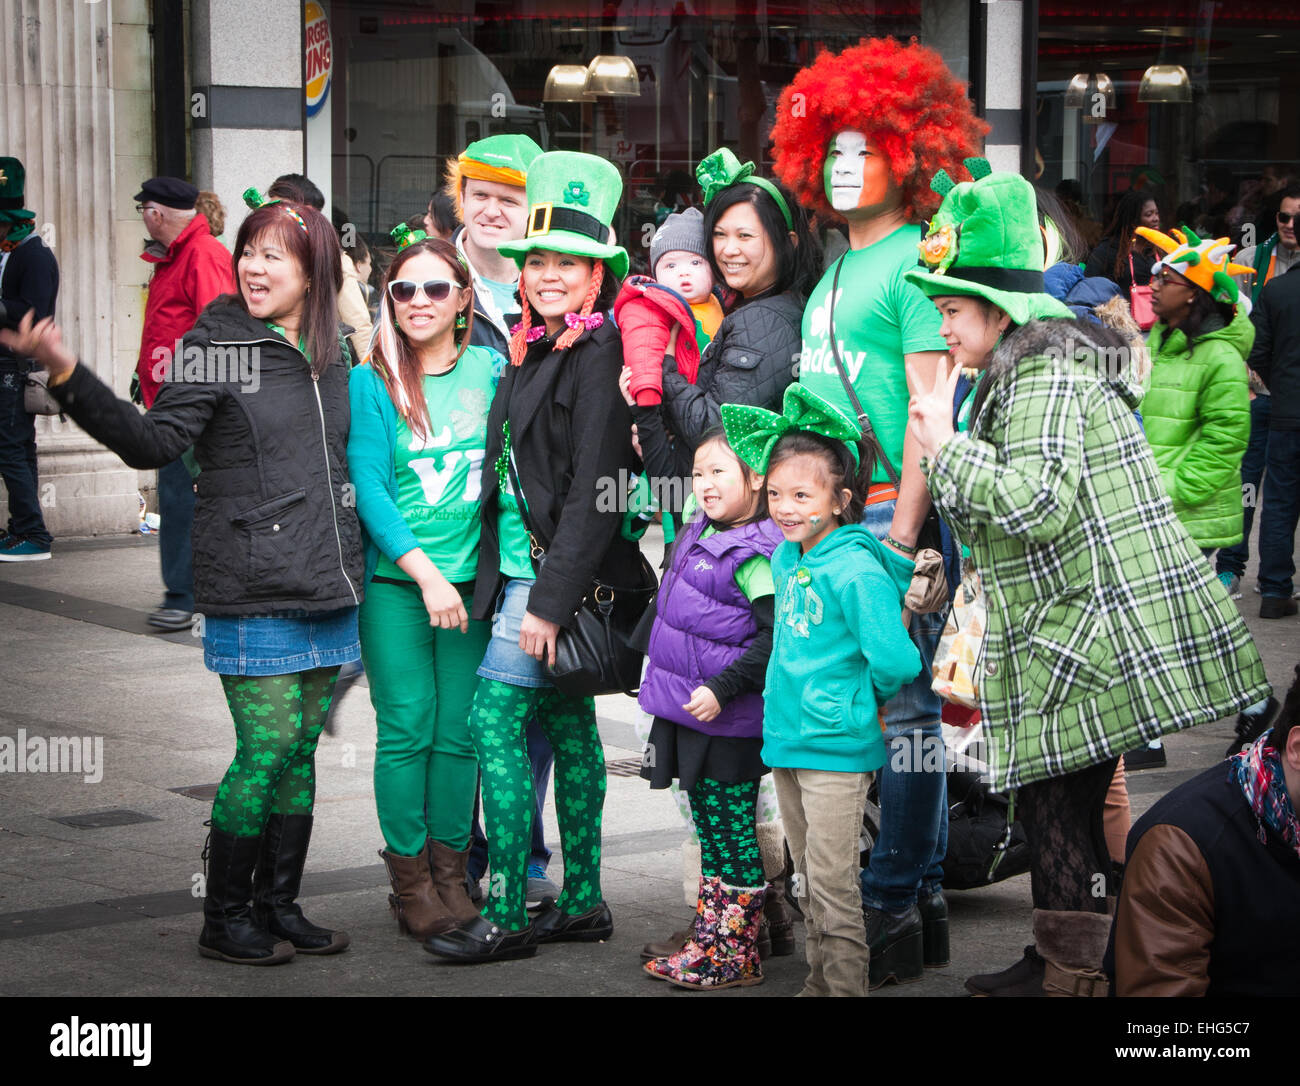 Family of Asian tourists enjoy St Patrick's day festival in Dublin Ireland wearing green clothes, facepaint and leprechaun hats. Stock Photo